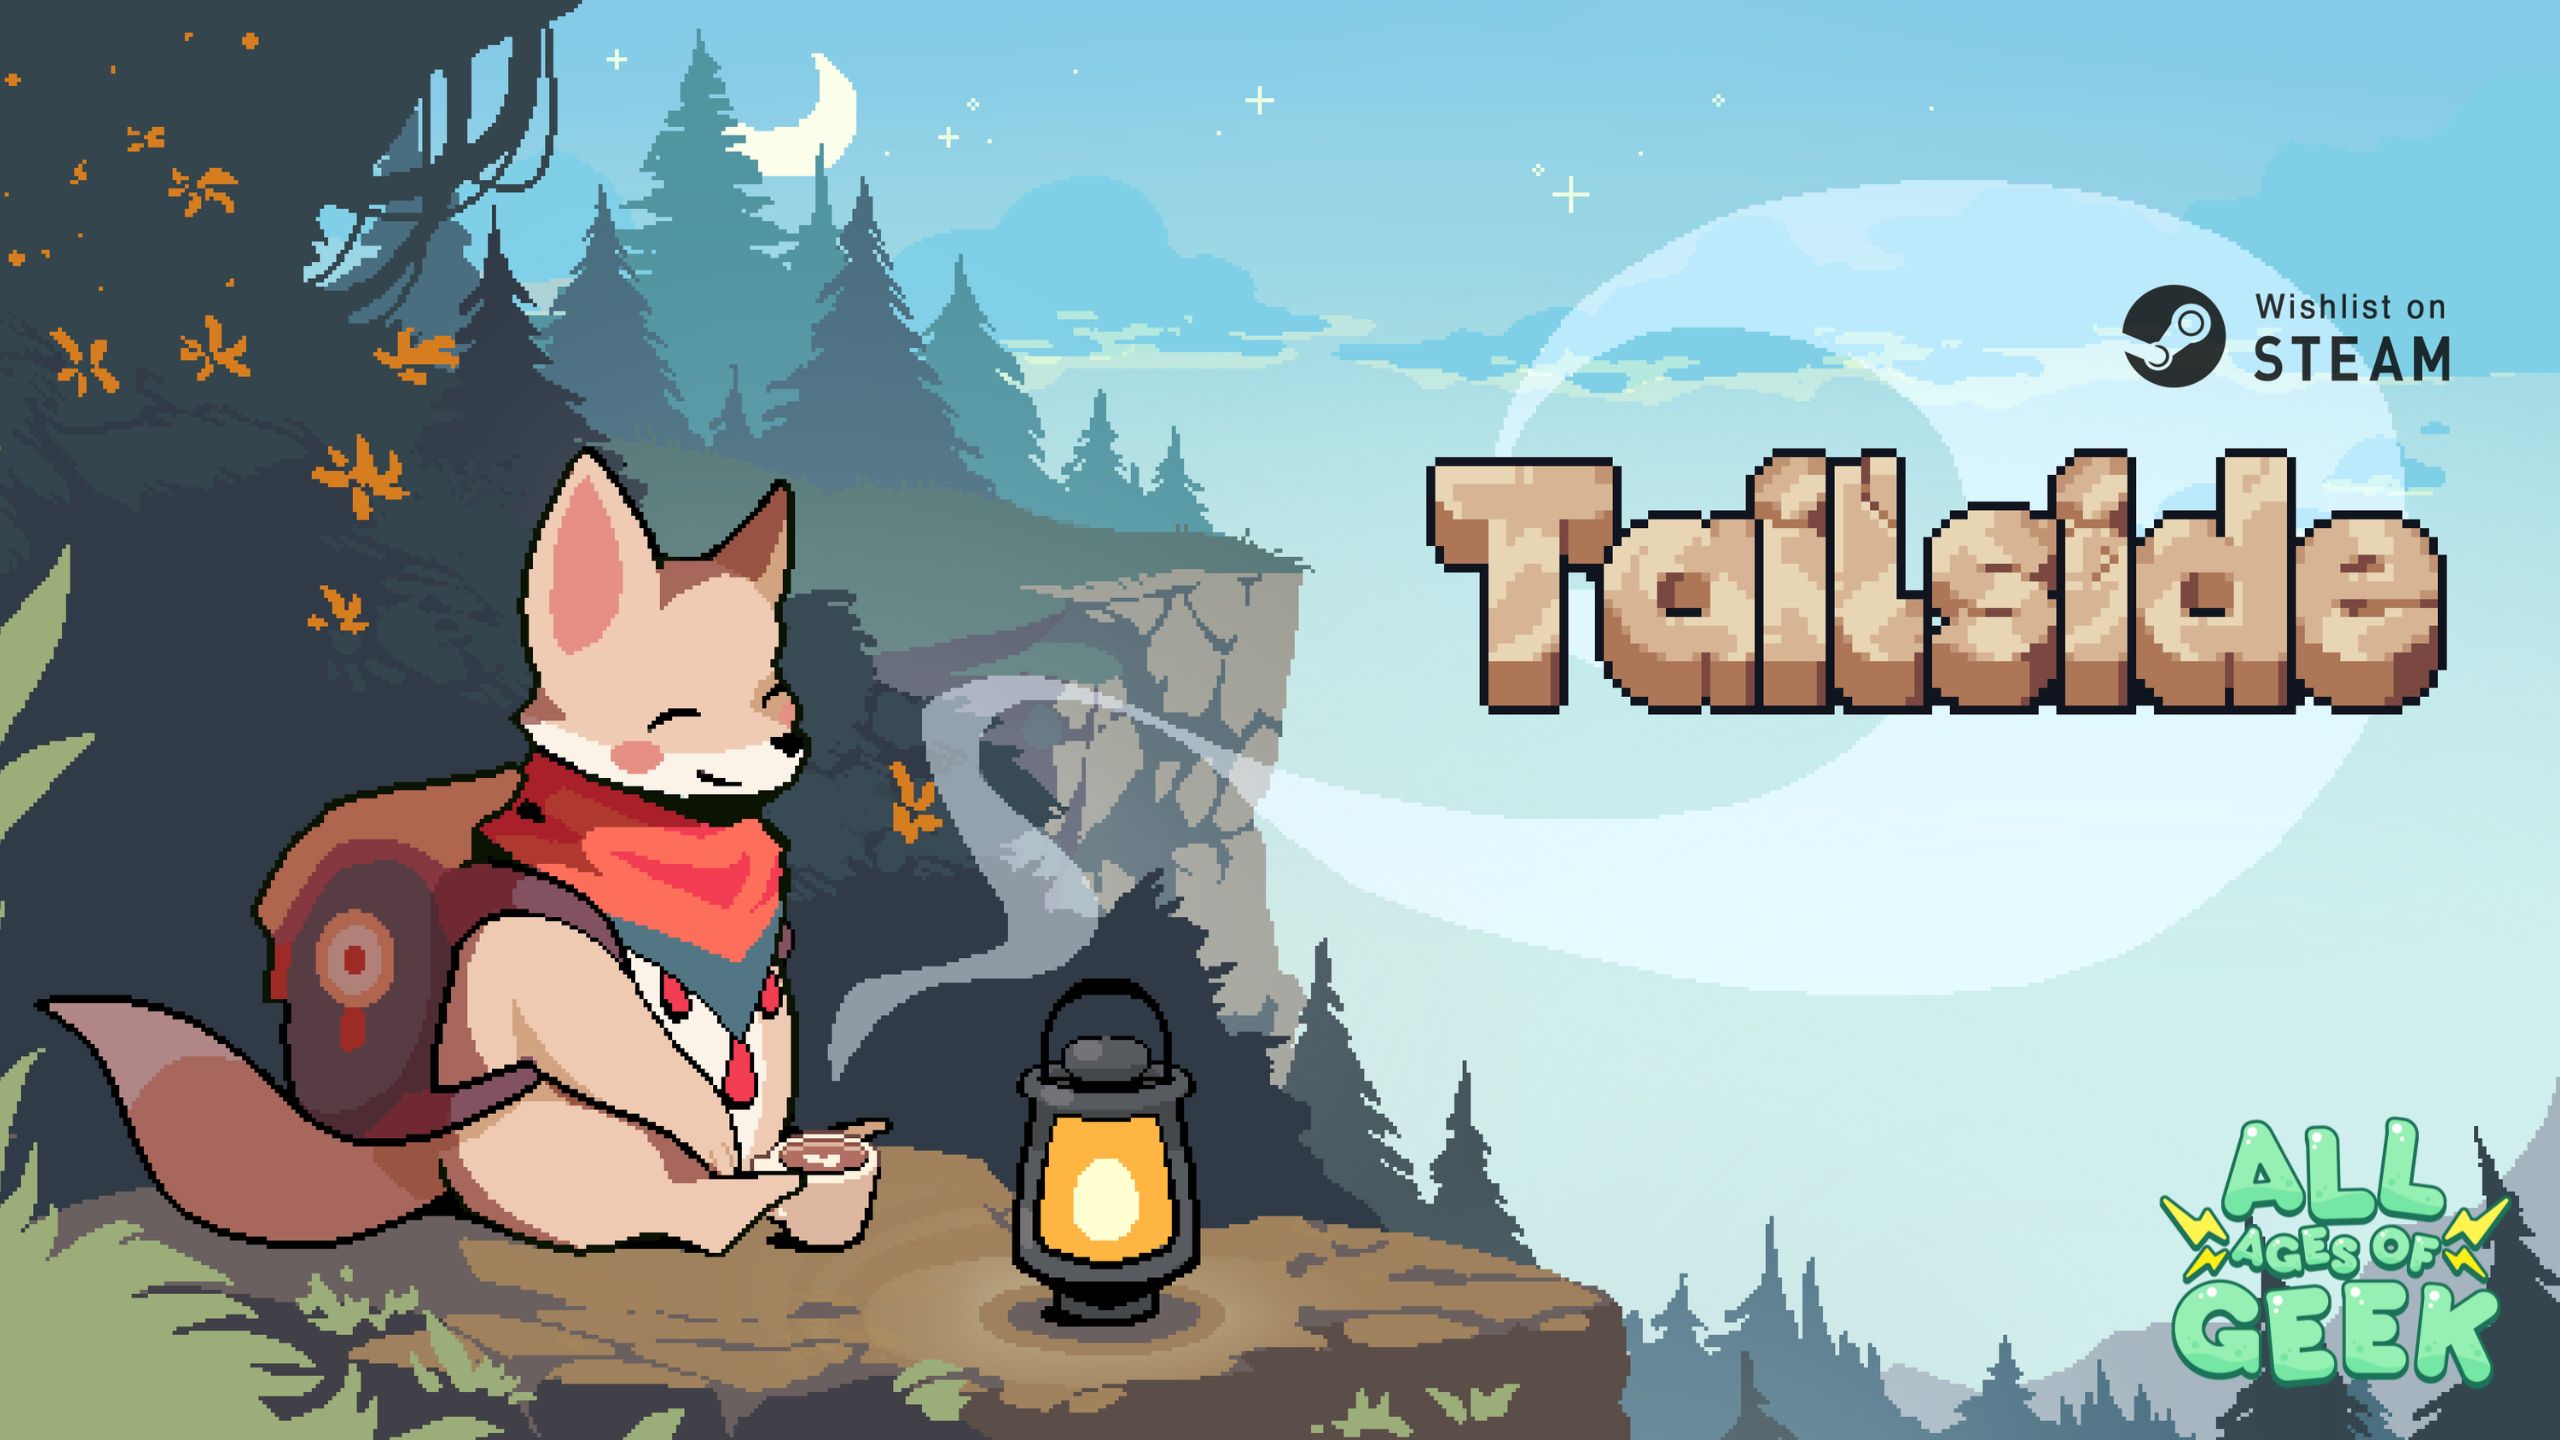 We Interviewed The Creator of Tailside!